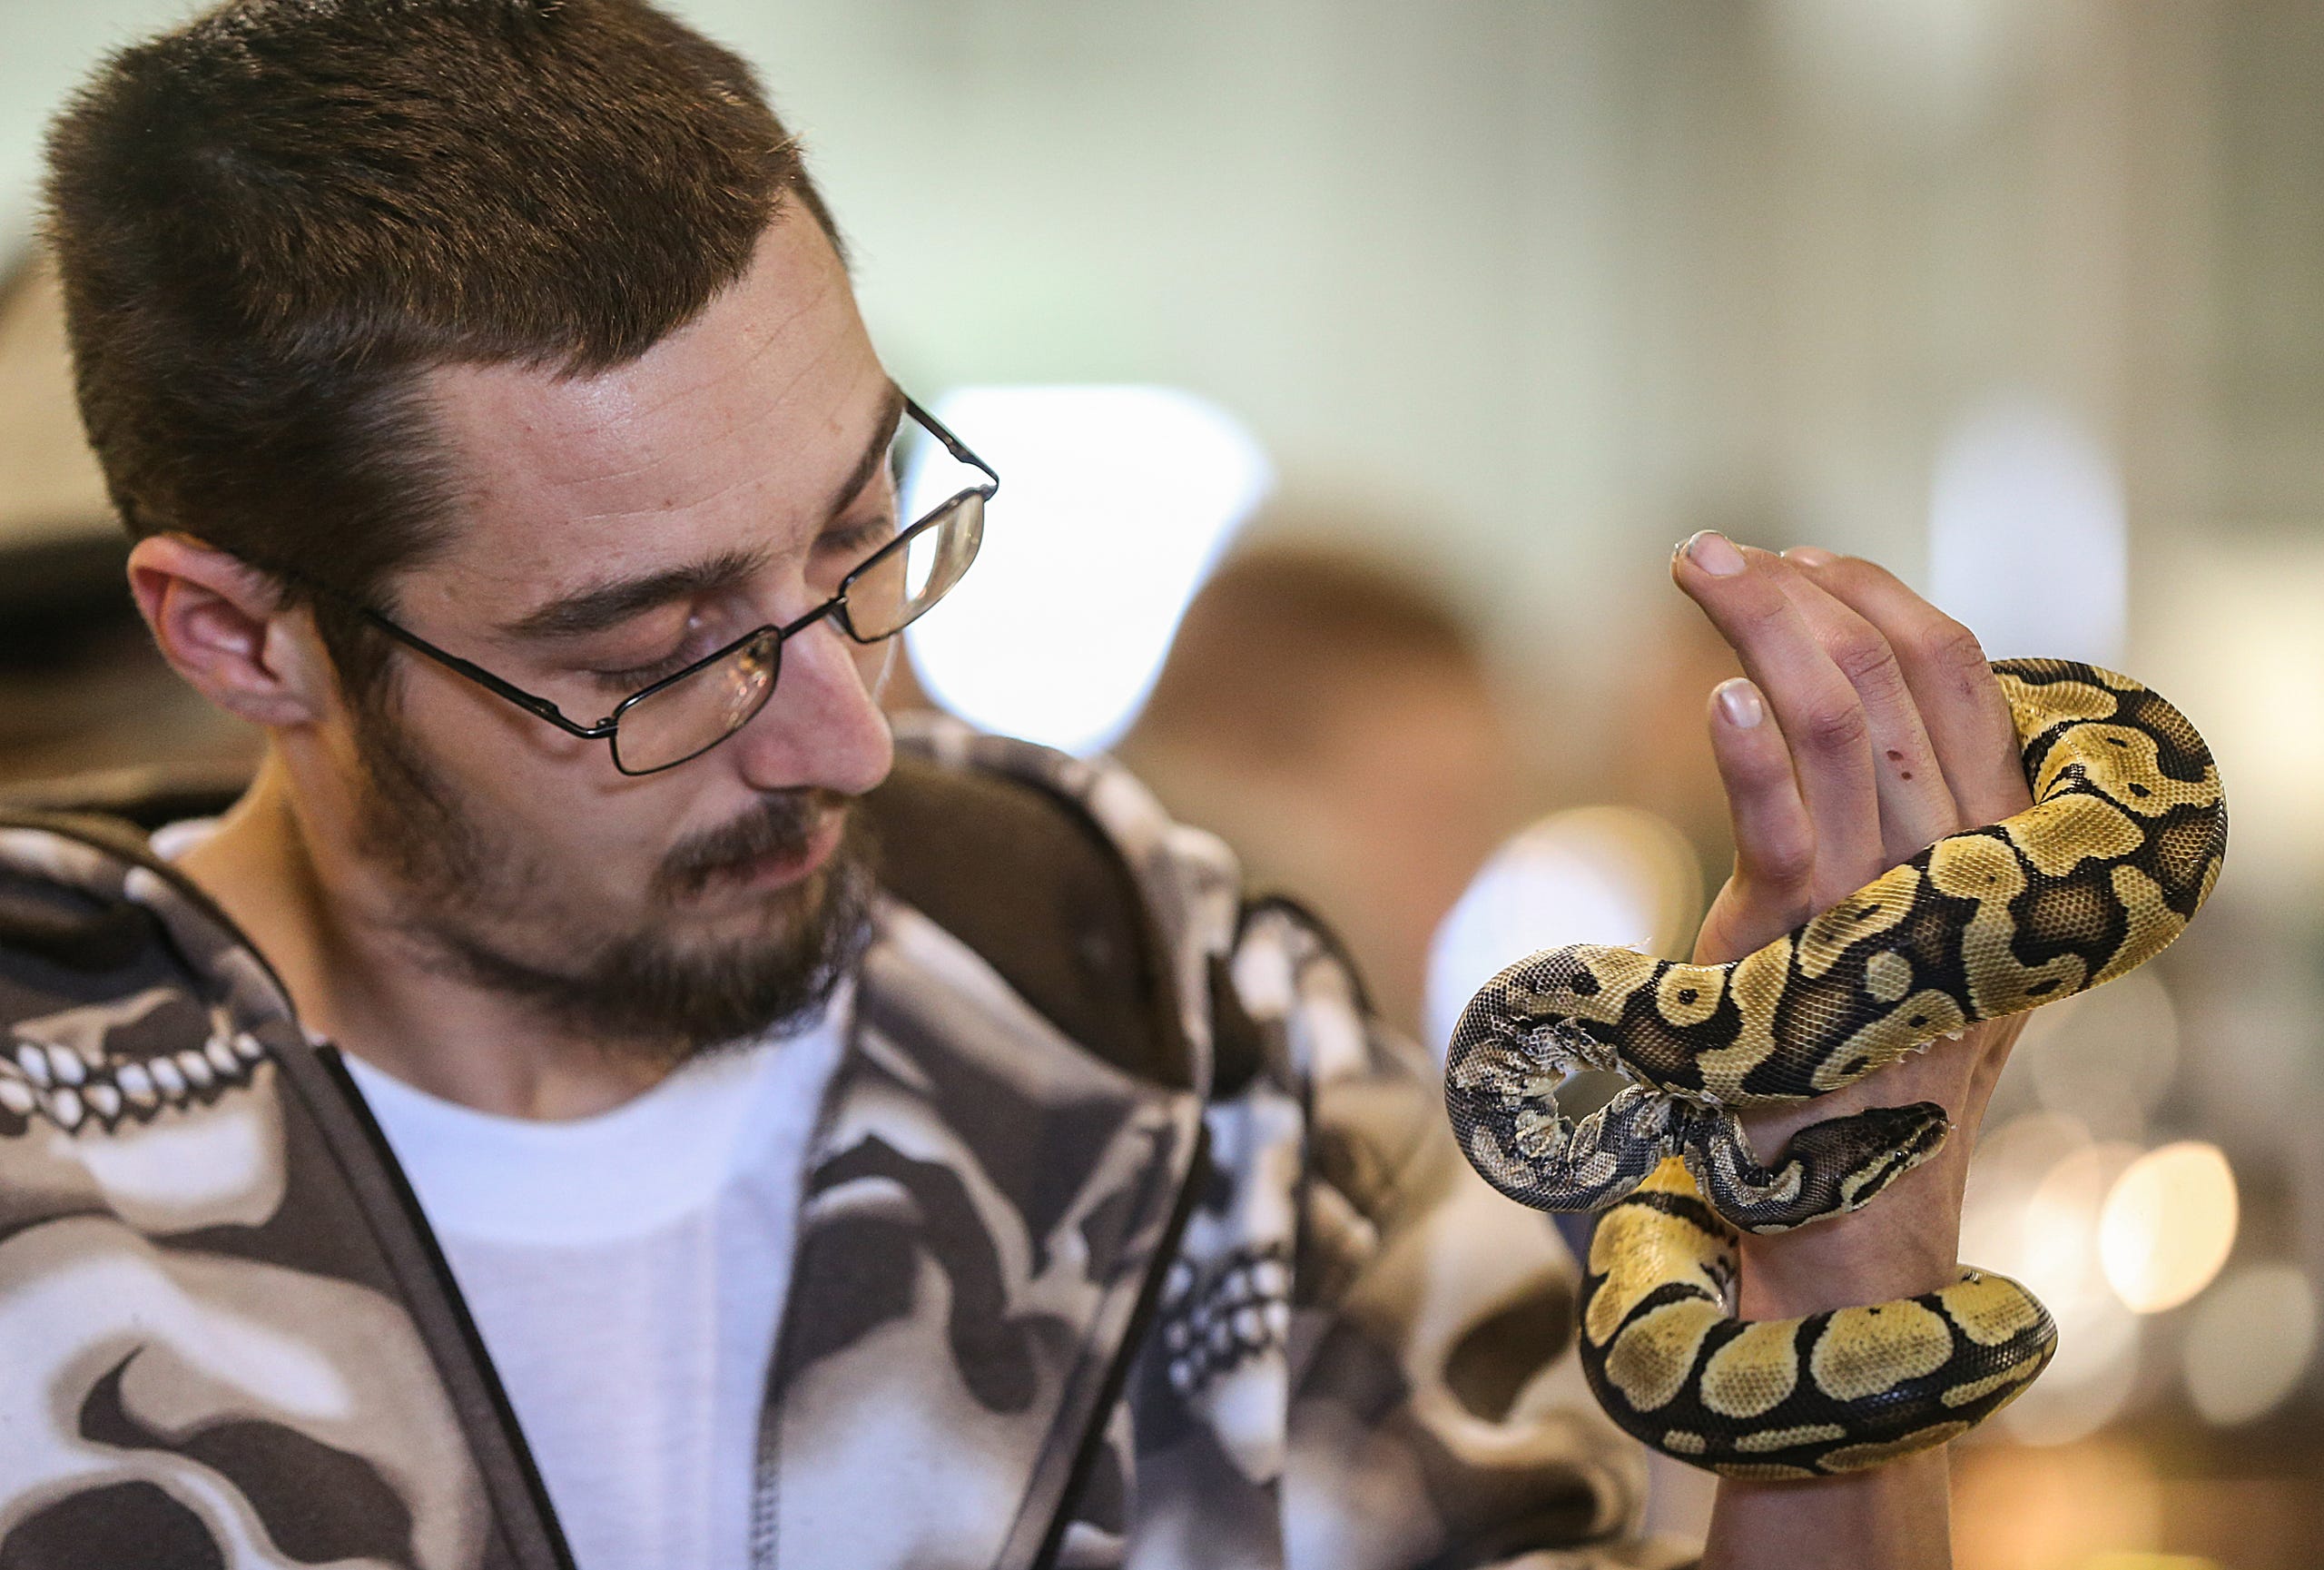 Midwest Reptile Show at state fairgrounds